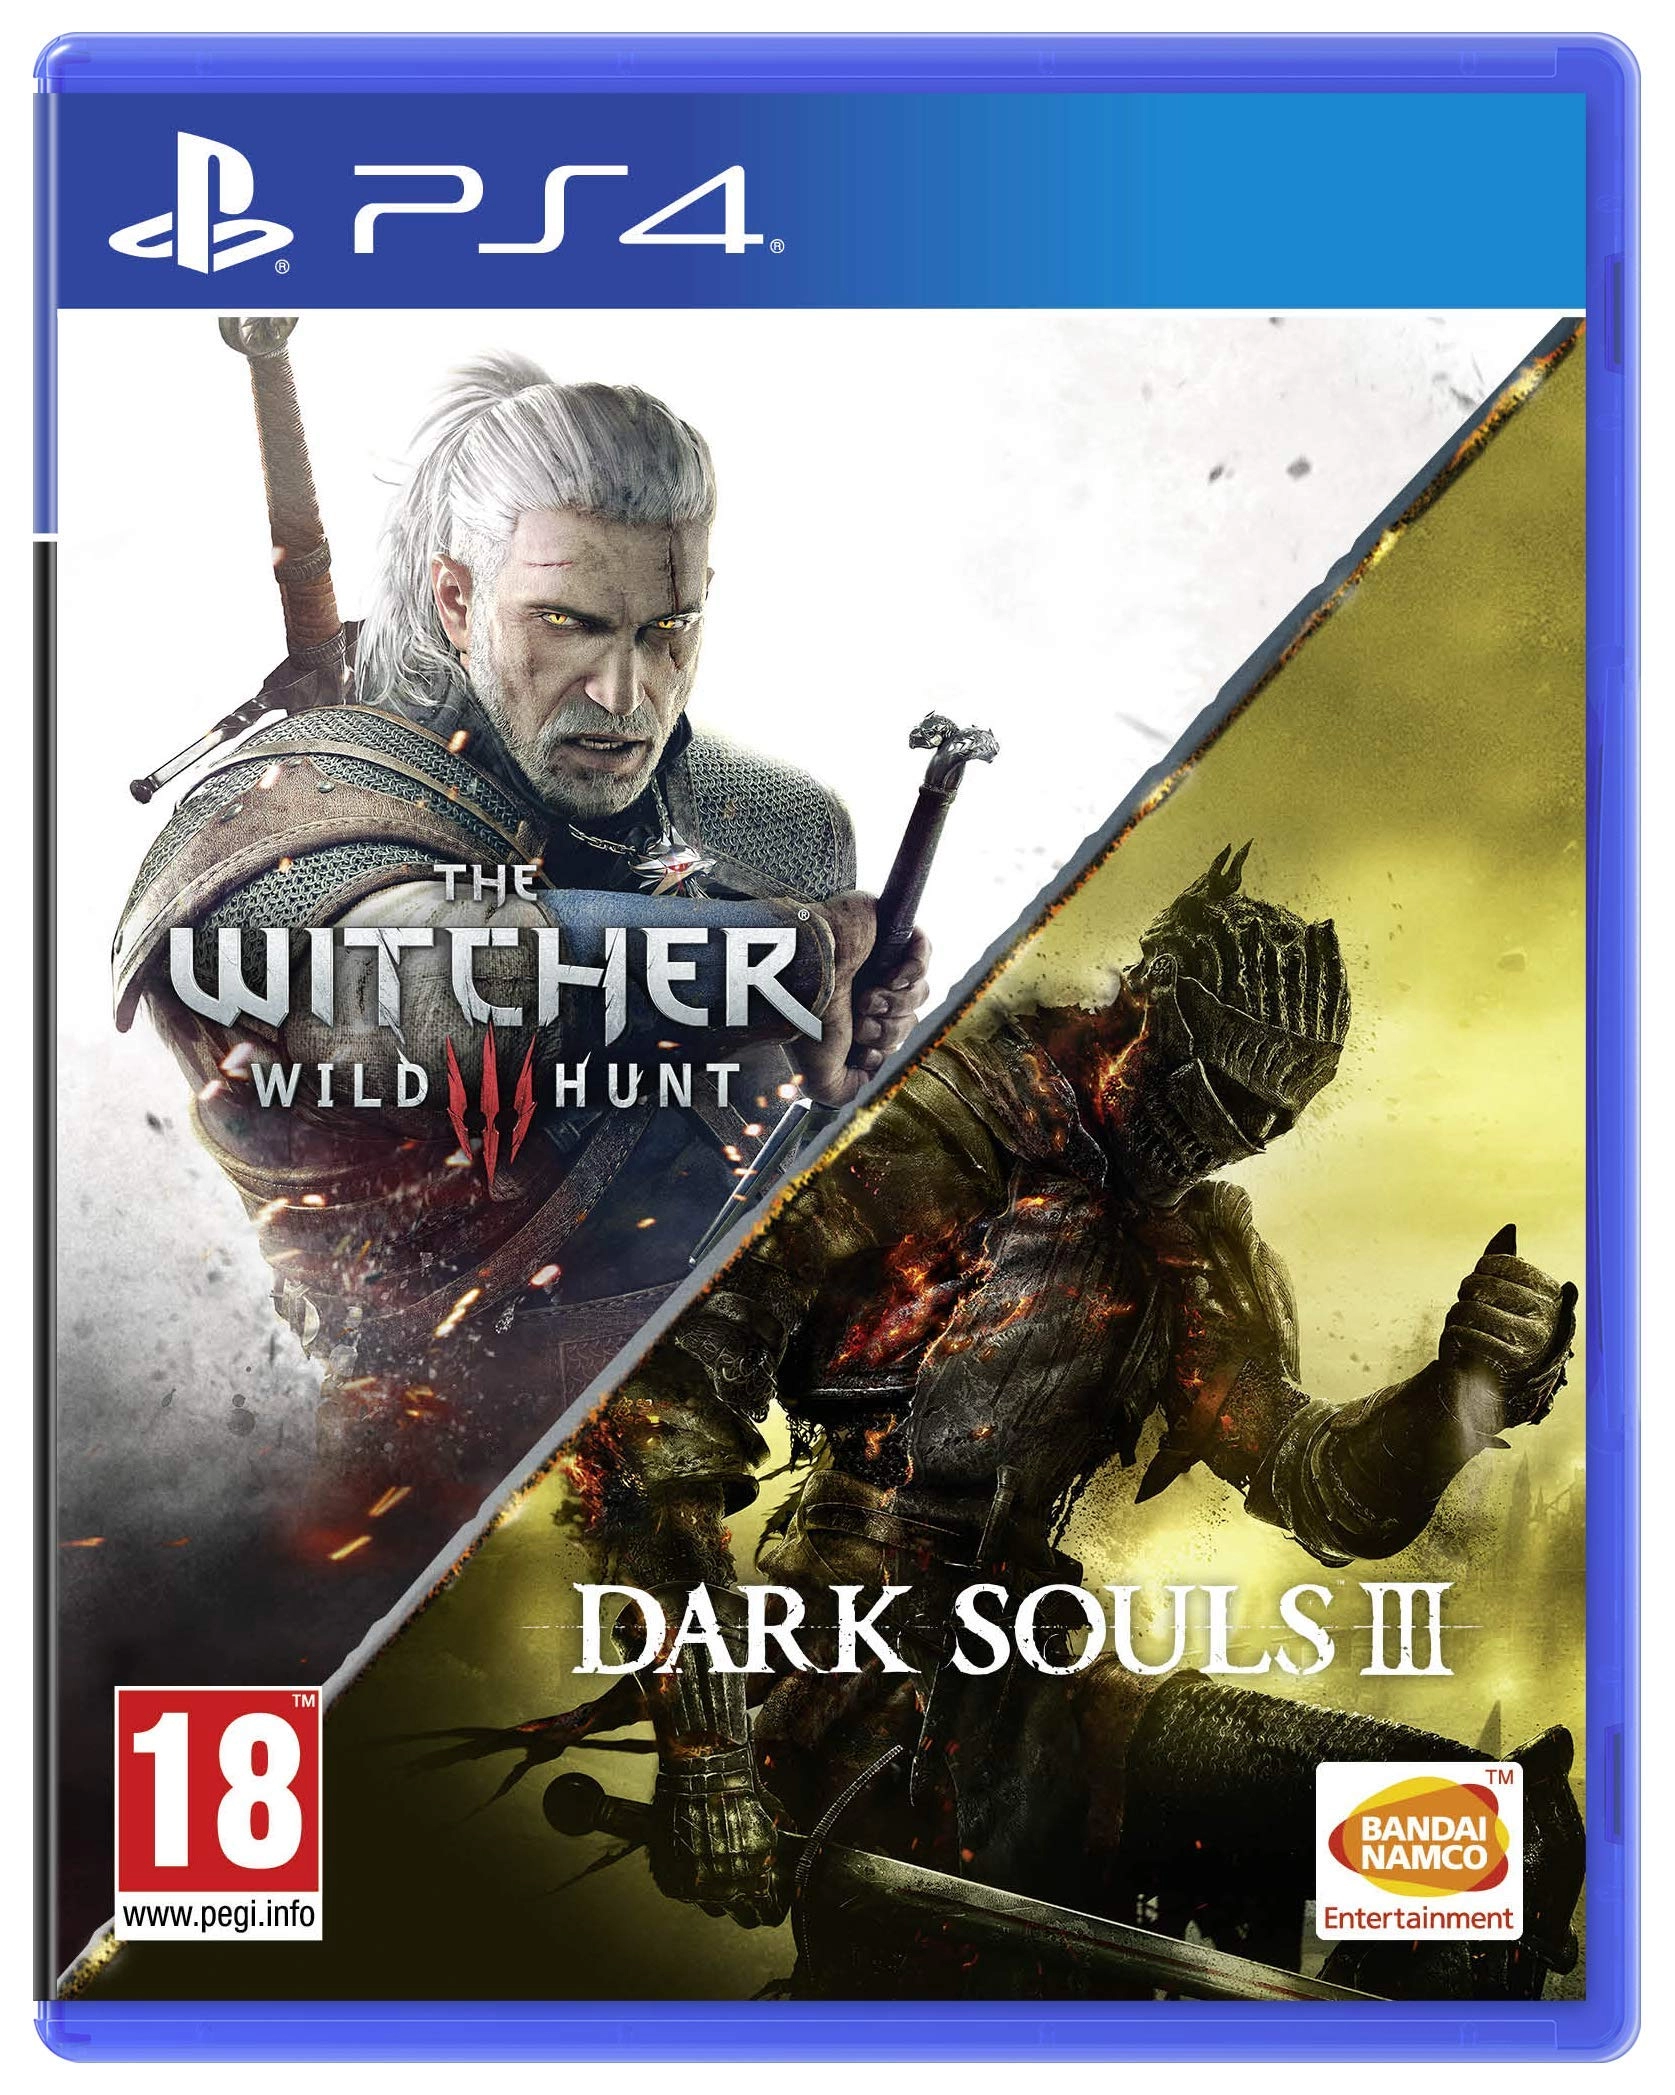 PS4 Dark Souls 3 - Witcher 3: The Wild Hunt Compilation